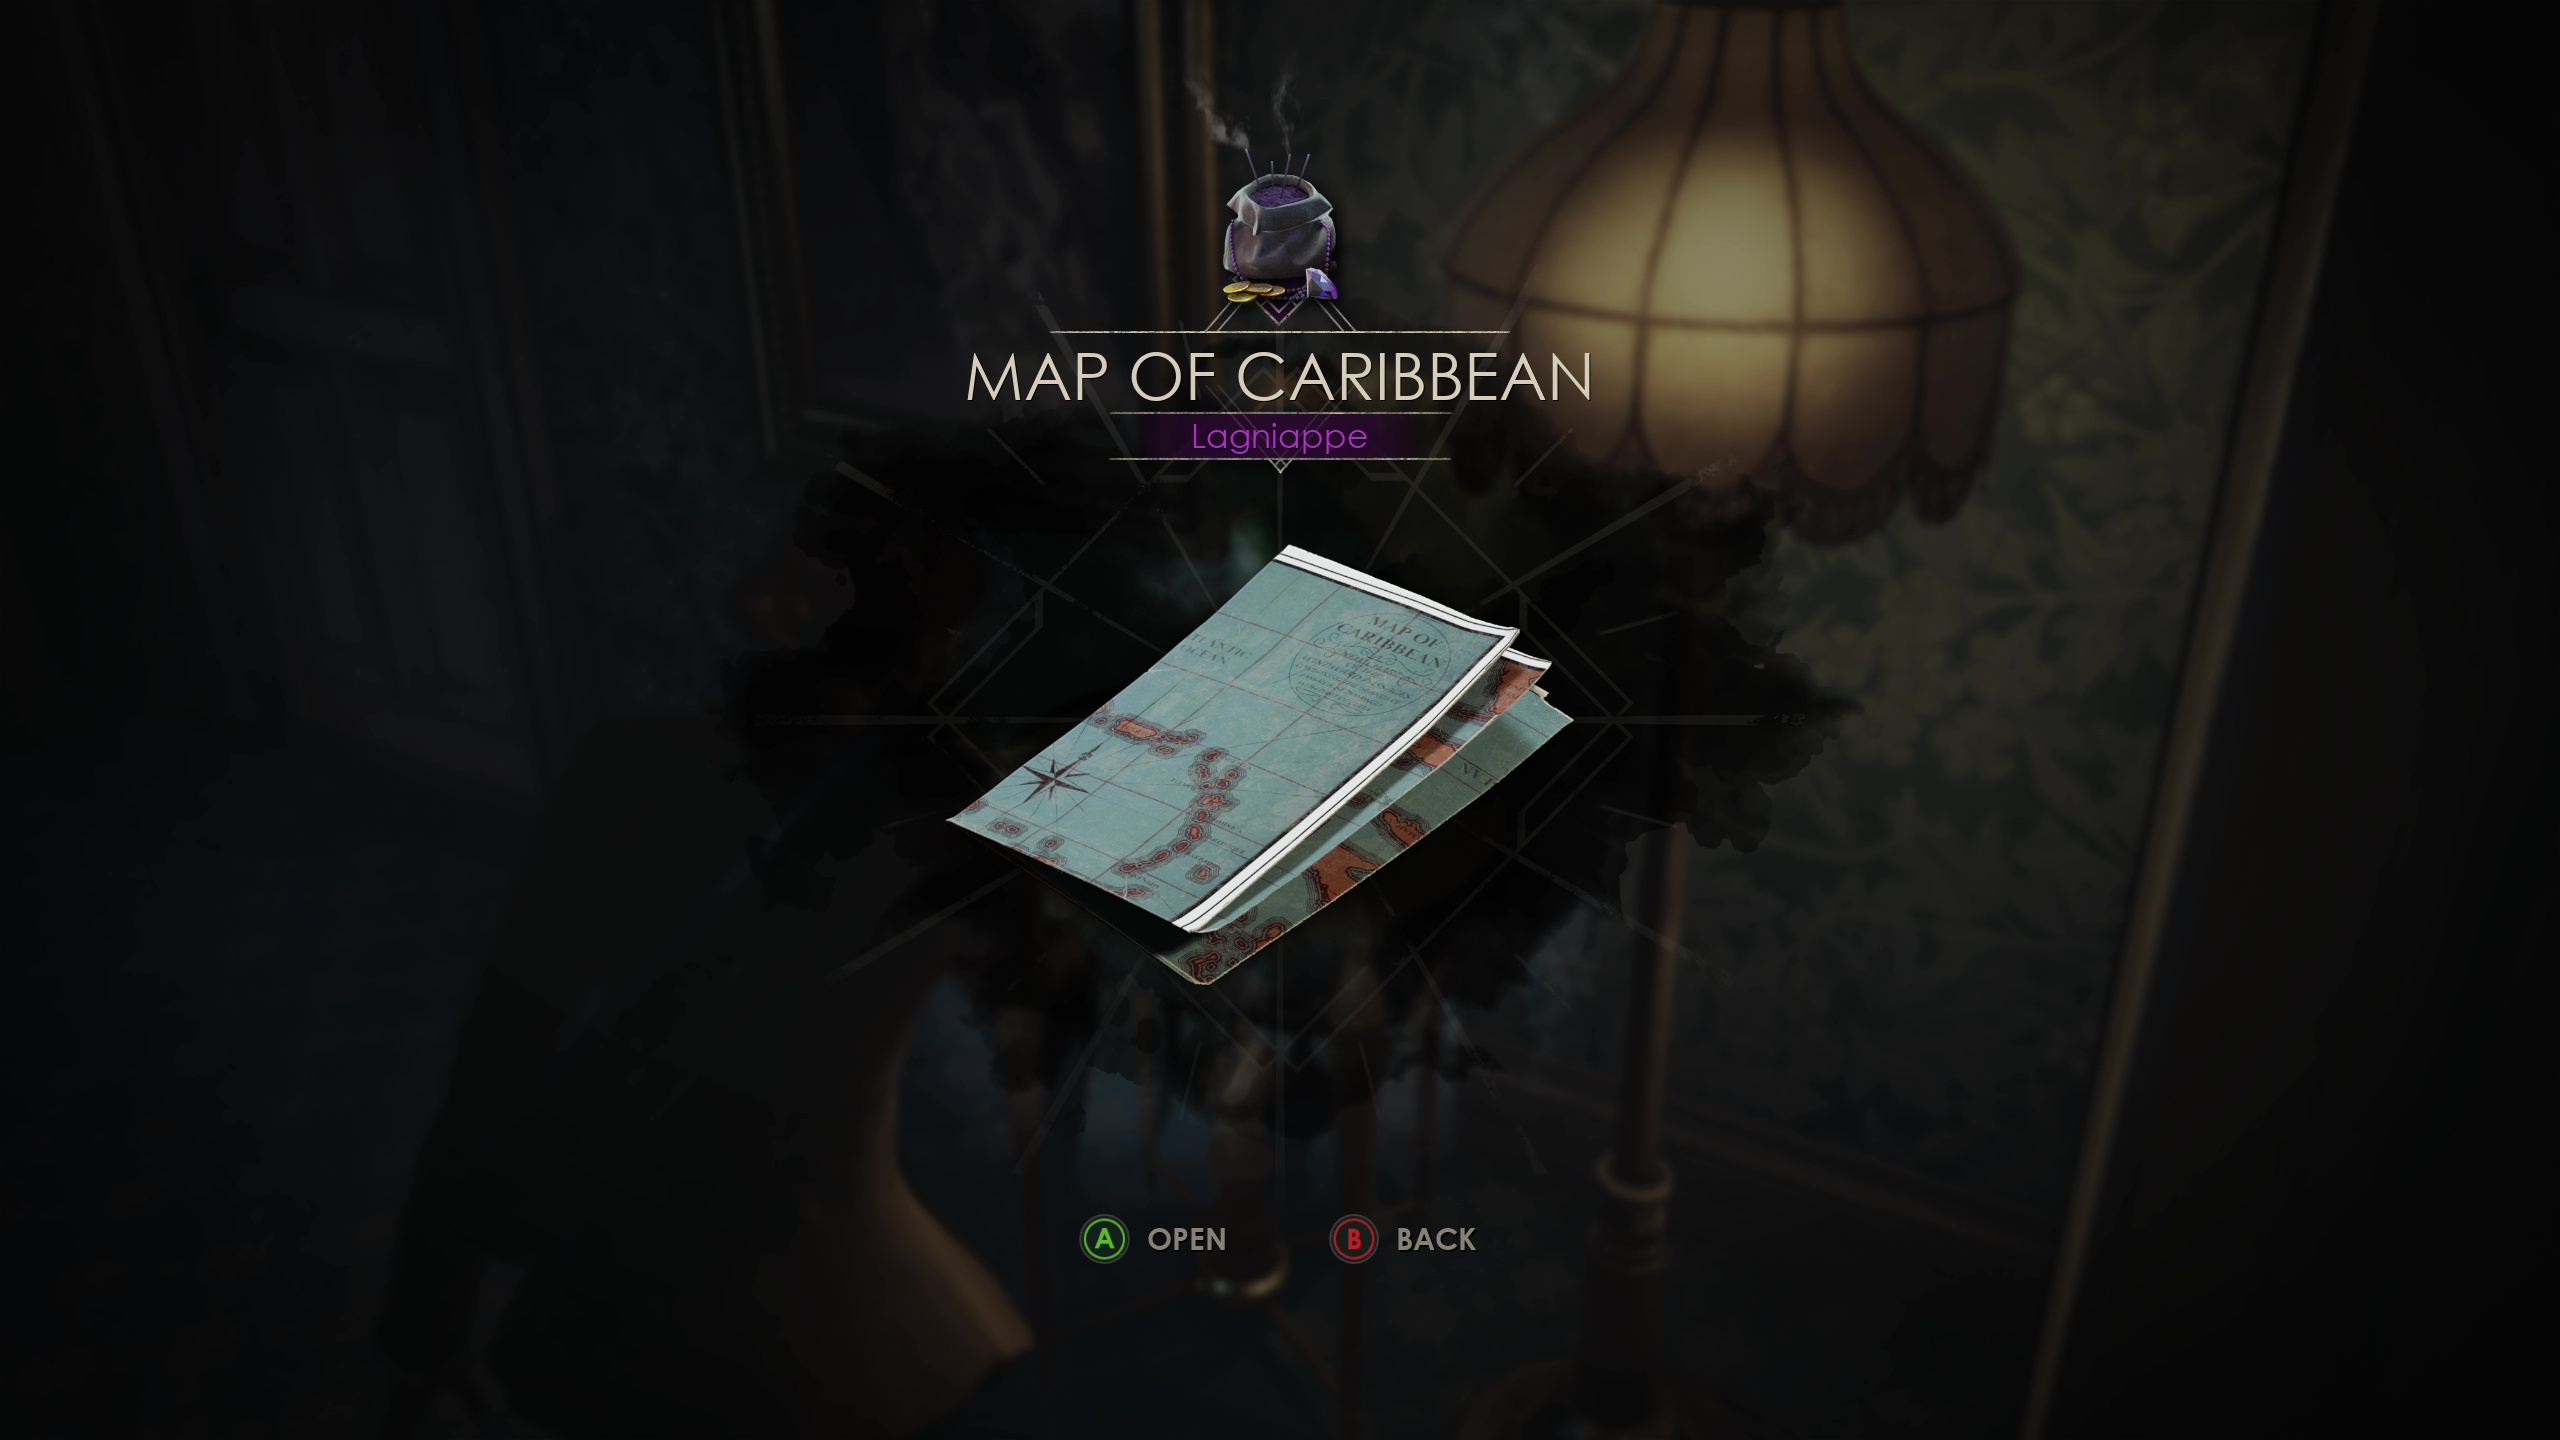 alone in the dark map of carribean lagniappe featured image